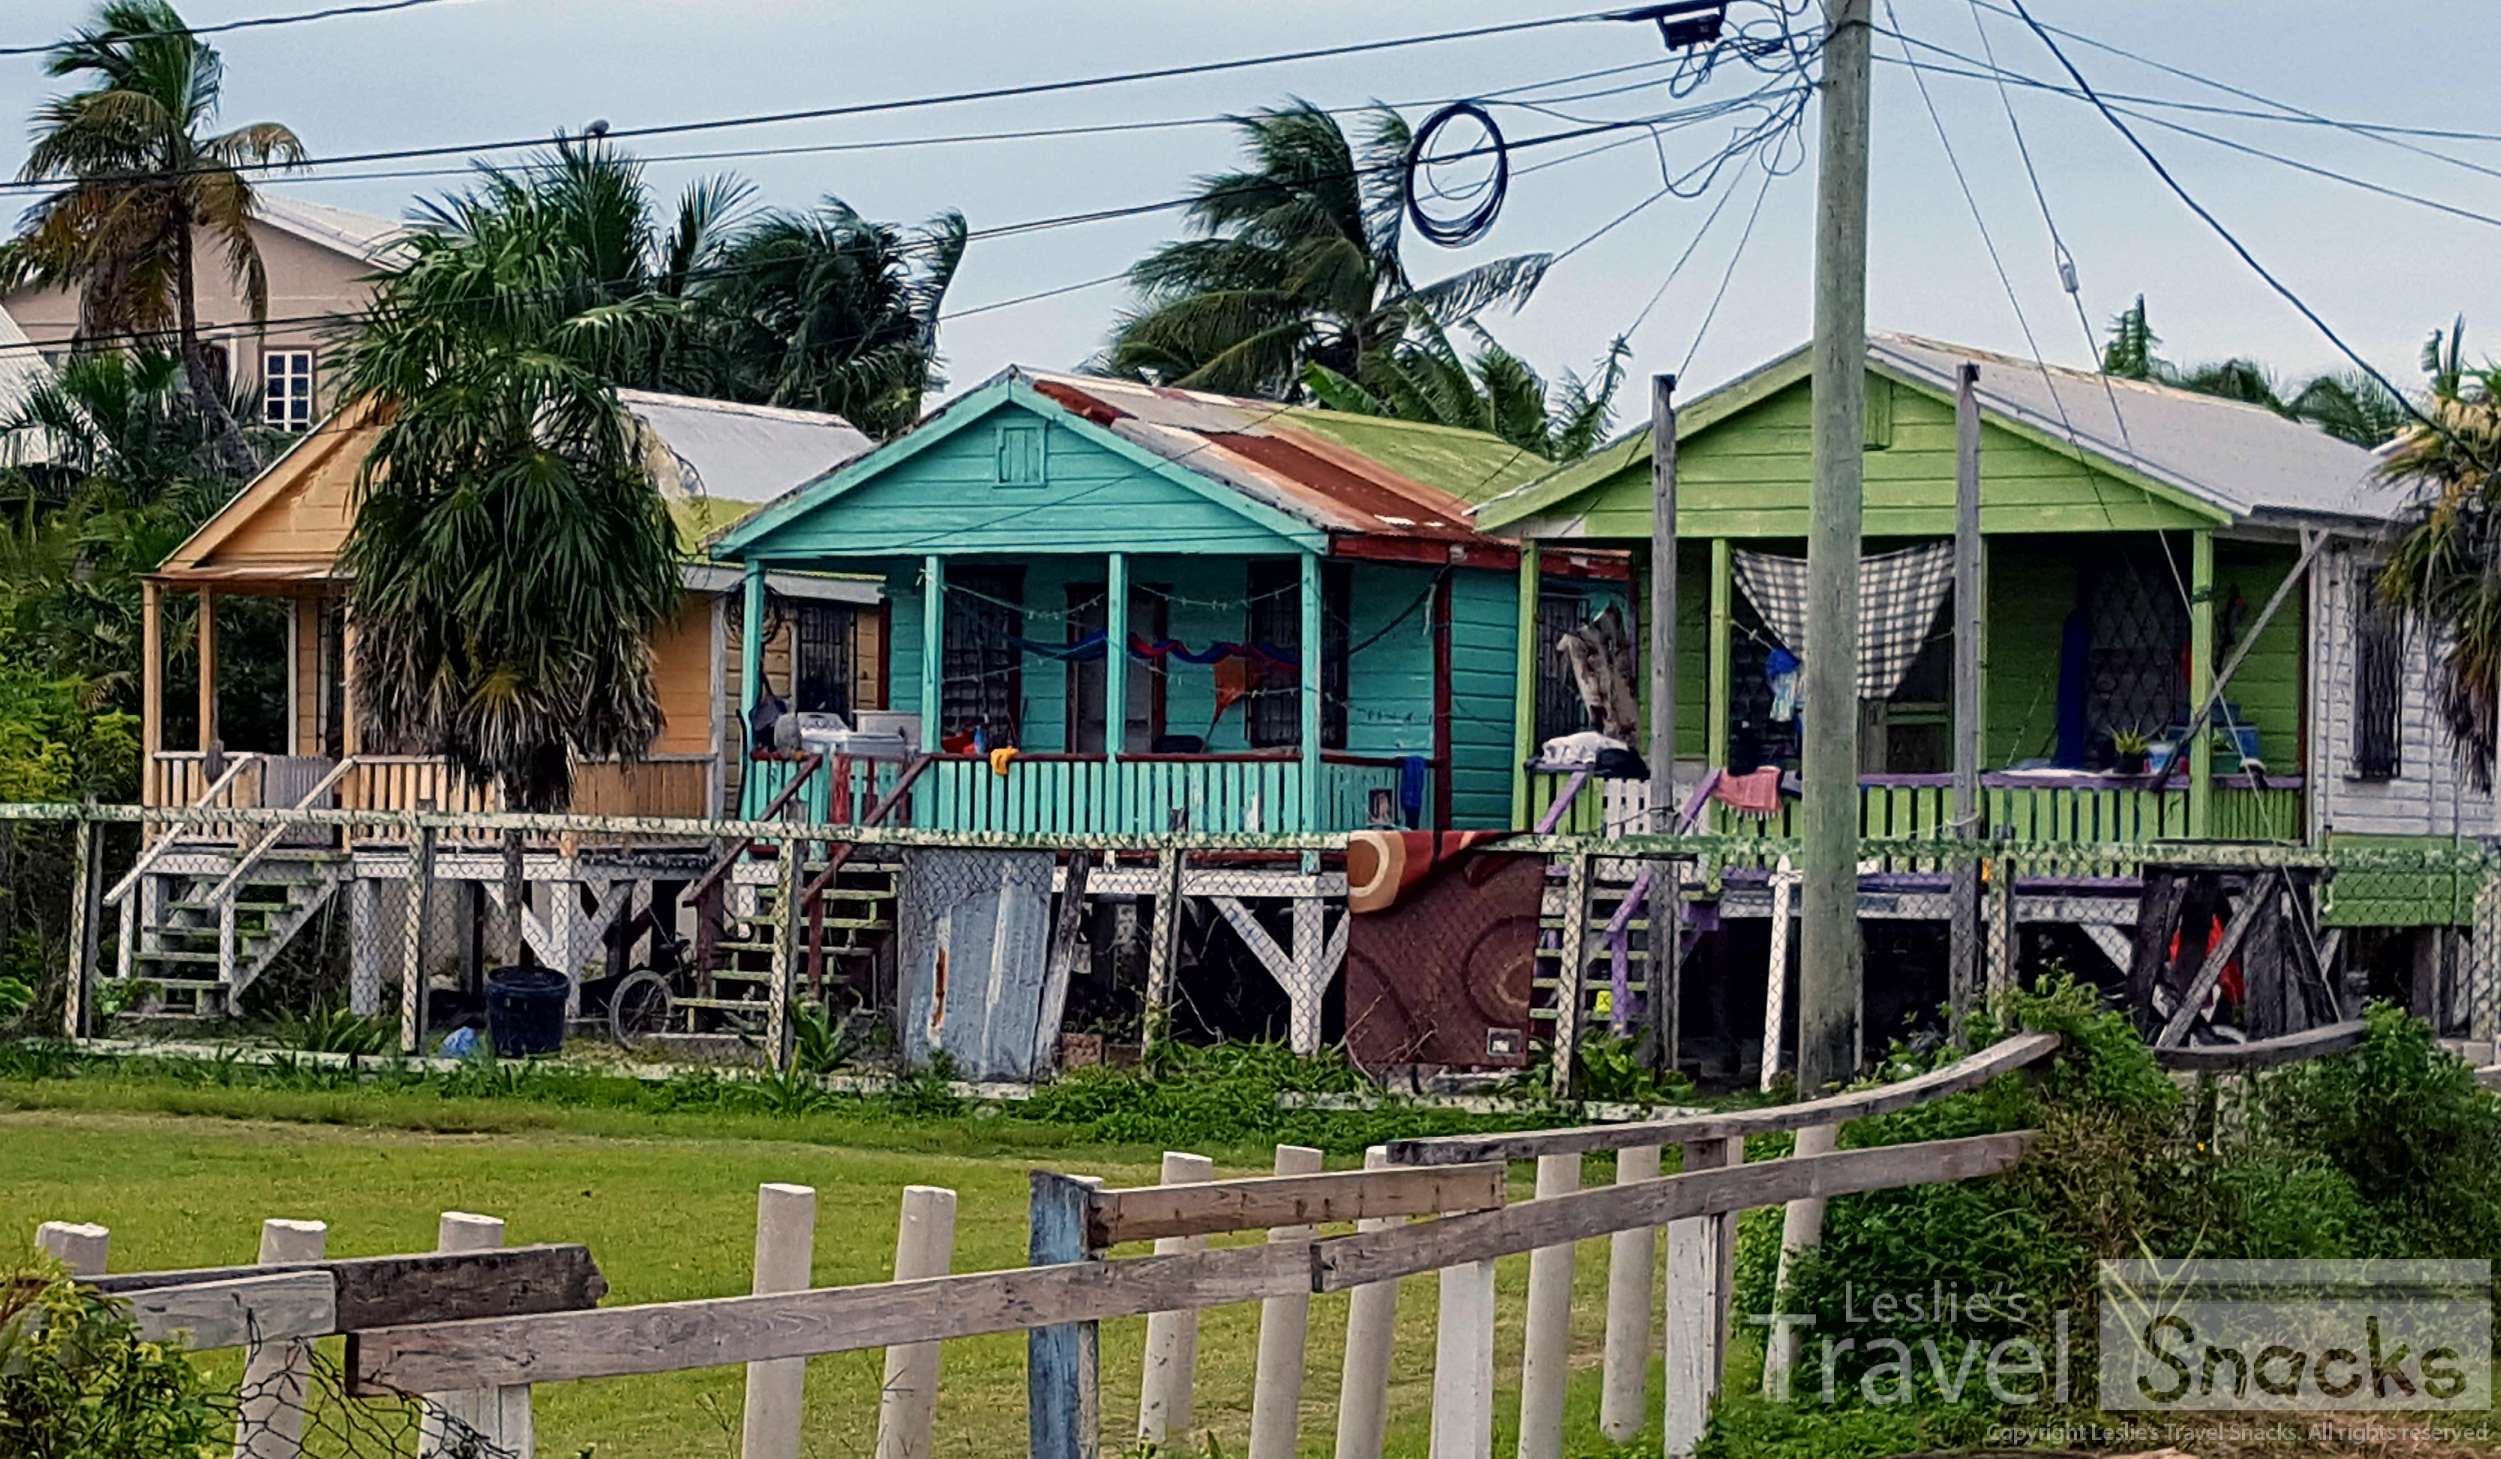 Colorful wooden houses on stilts speckle the countryside